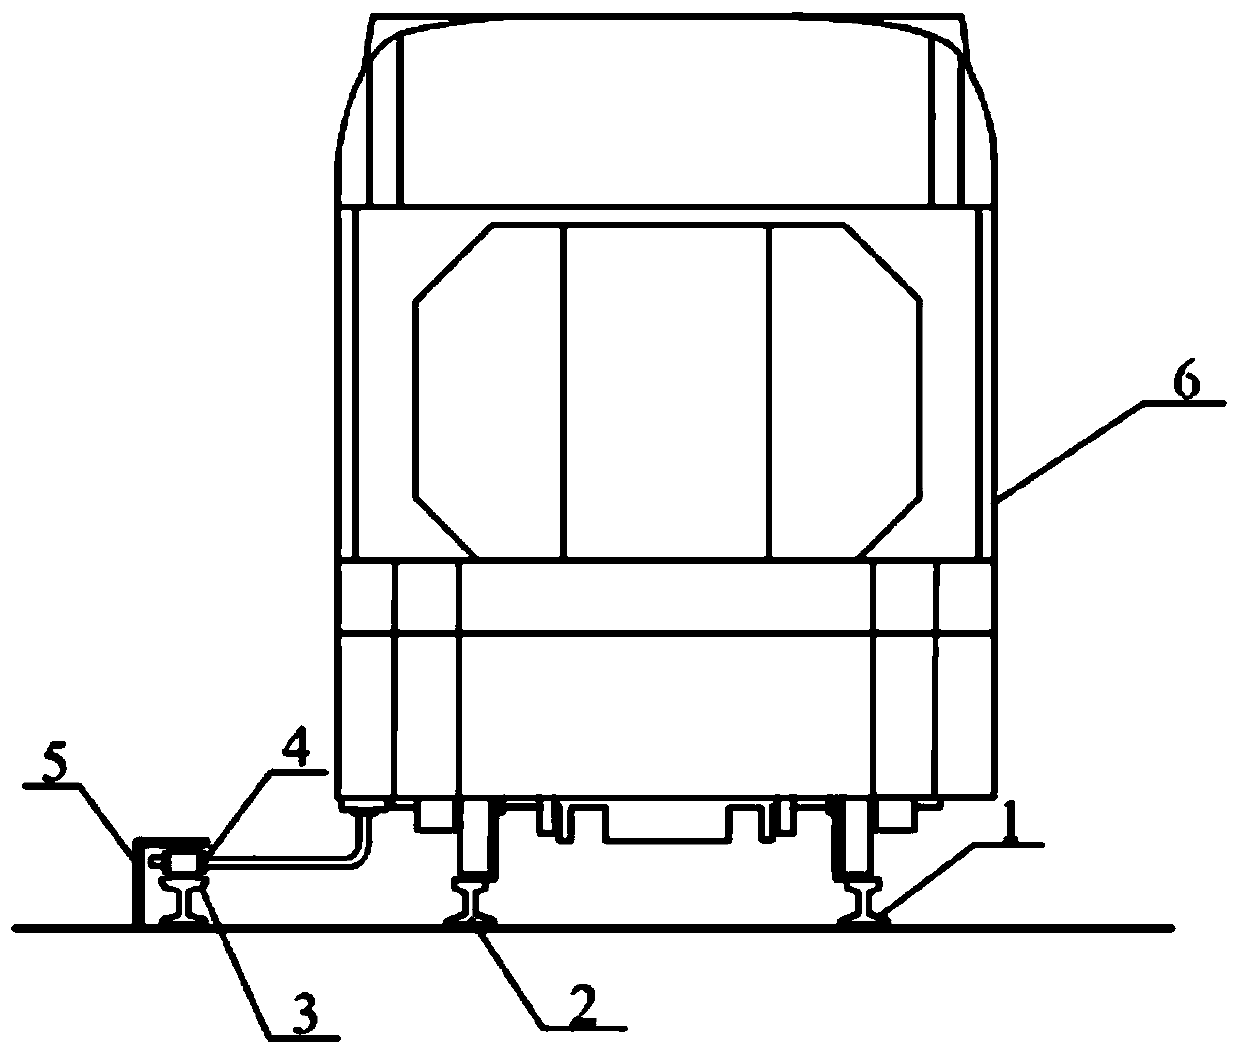 Third rail independent grounding system applicable to high-speed train